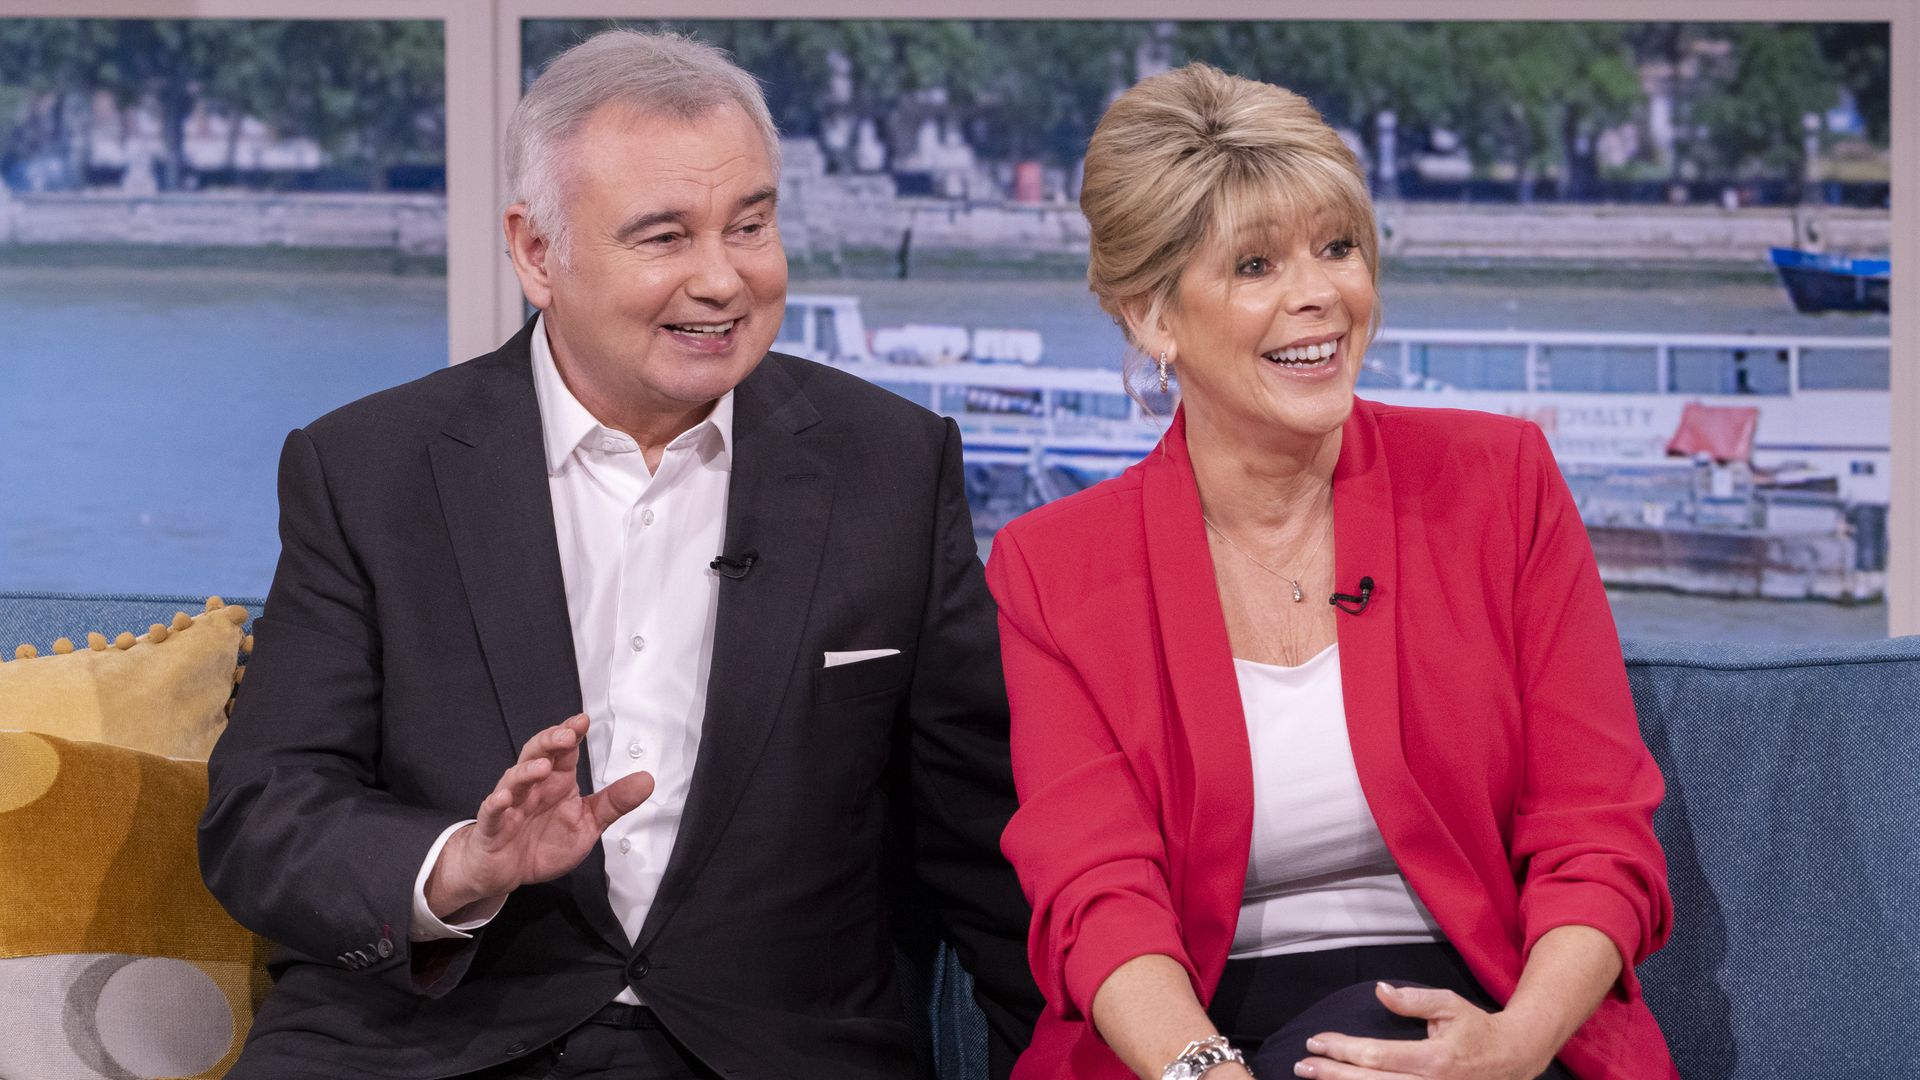 Eamonn Holmes in black suit and Ruth Langsford in red blazer on set of This Morning